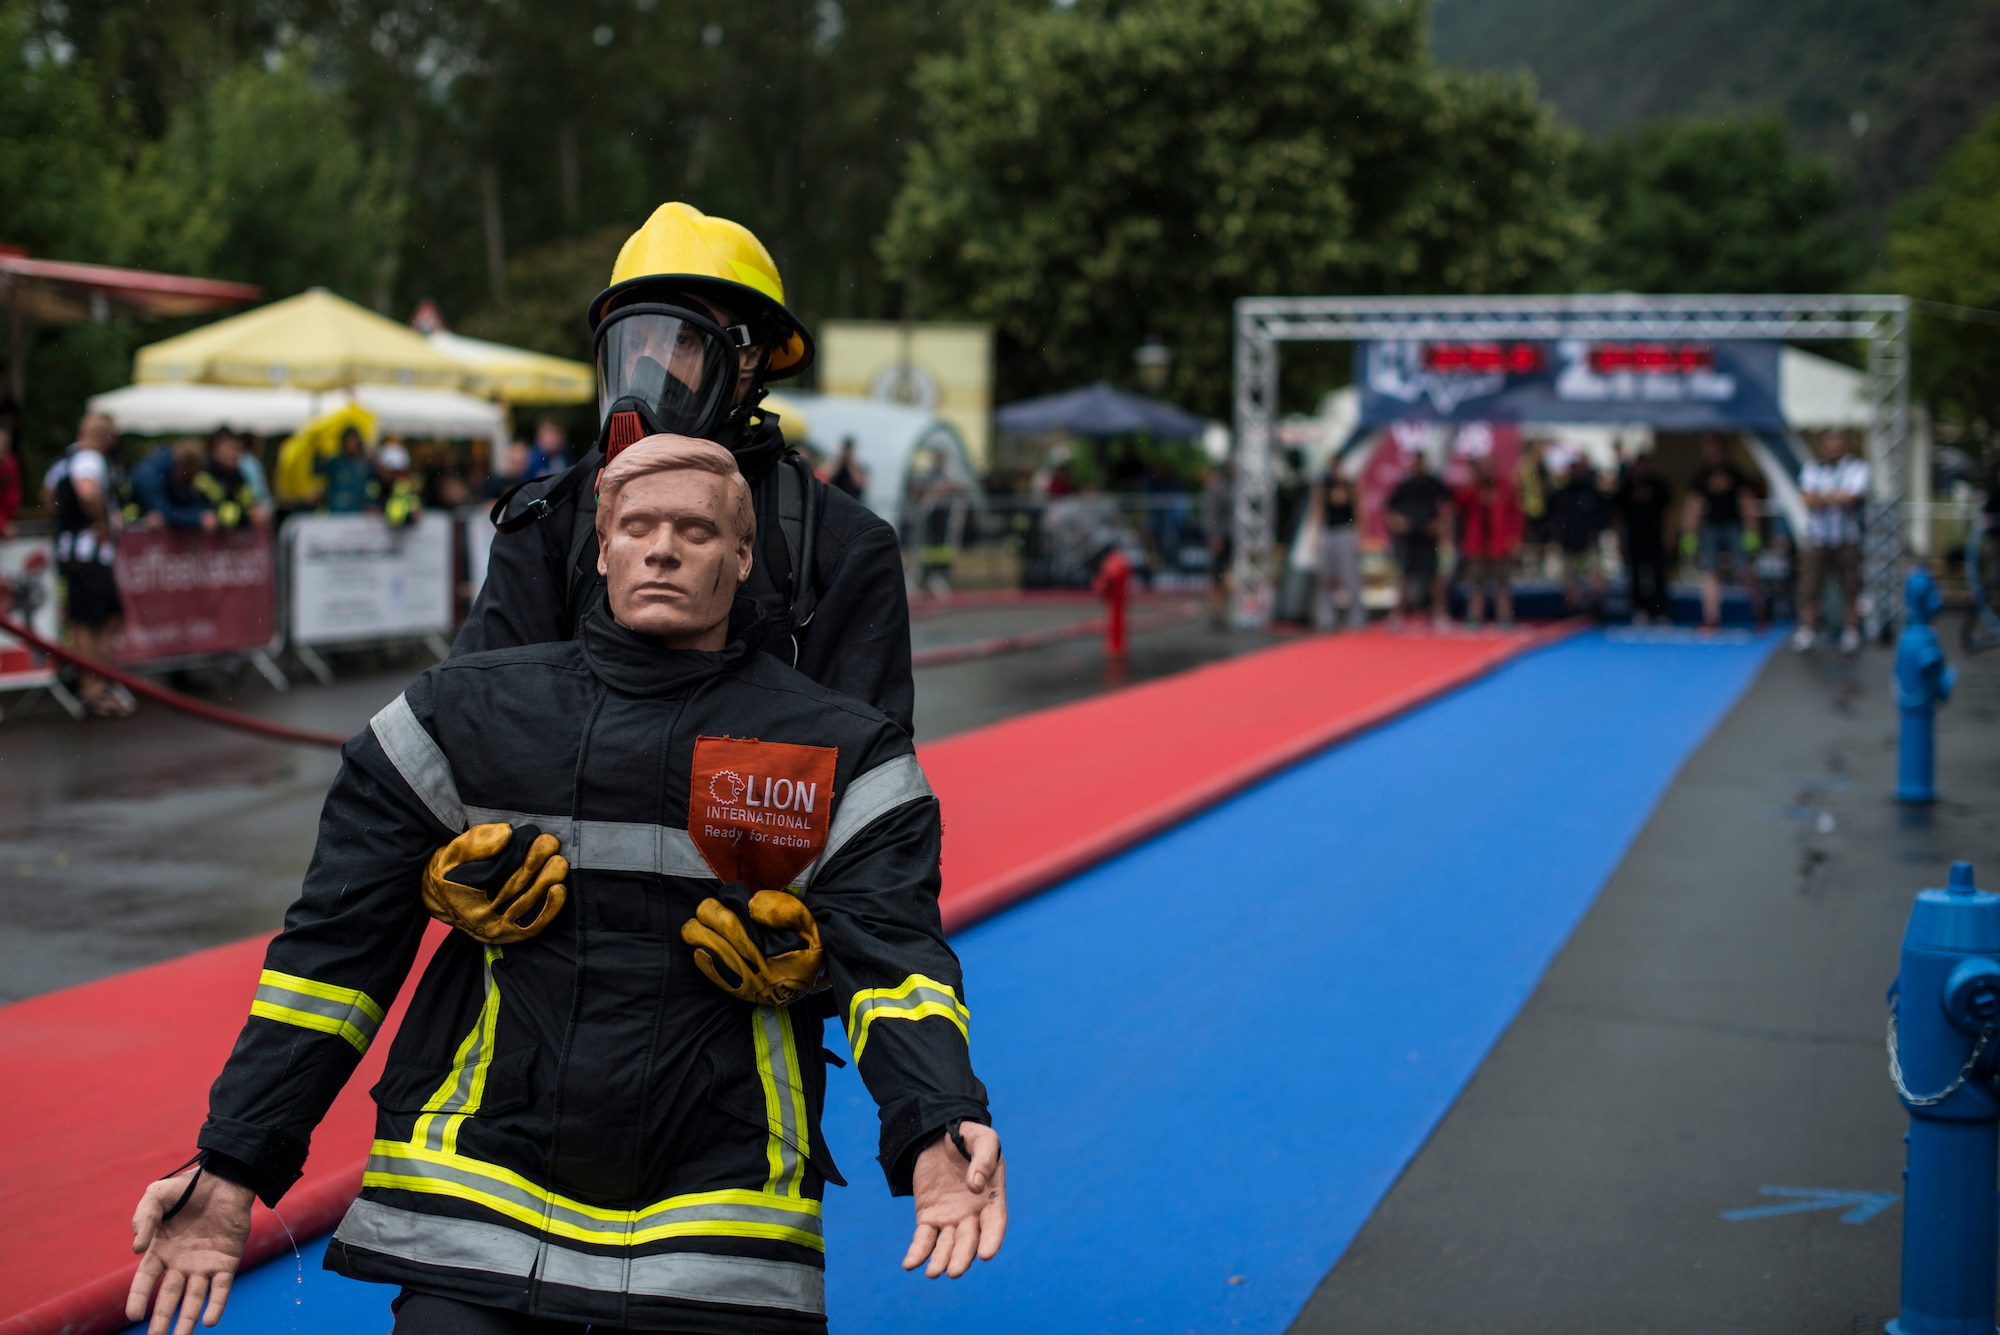 Roger Mead, Royal Air Force Alconbury, 423rd Civil Engineer Squadron firefighter, leads the race during the victim rescue obstacle during the first Mosel Firefighter Combat Challenge in Ediger-Eller, Germany, July 5, 2014. The victim rescue is the last obstacle of five requiring a firefighter to carry a 175-pound mannequin 30 meters to the finish line. (U.S. Air Force photo by Staff Sgt. Christopher Ruano/Released)